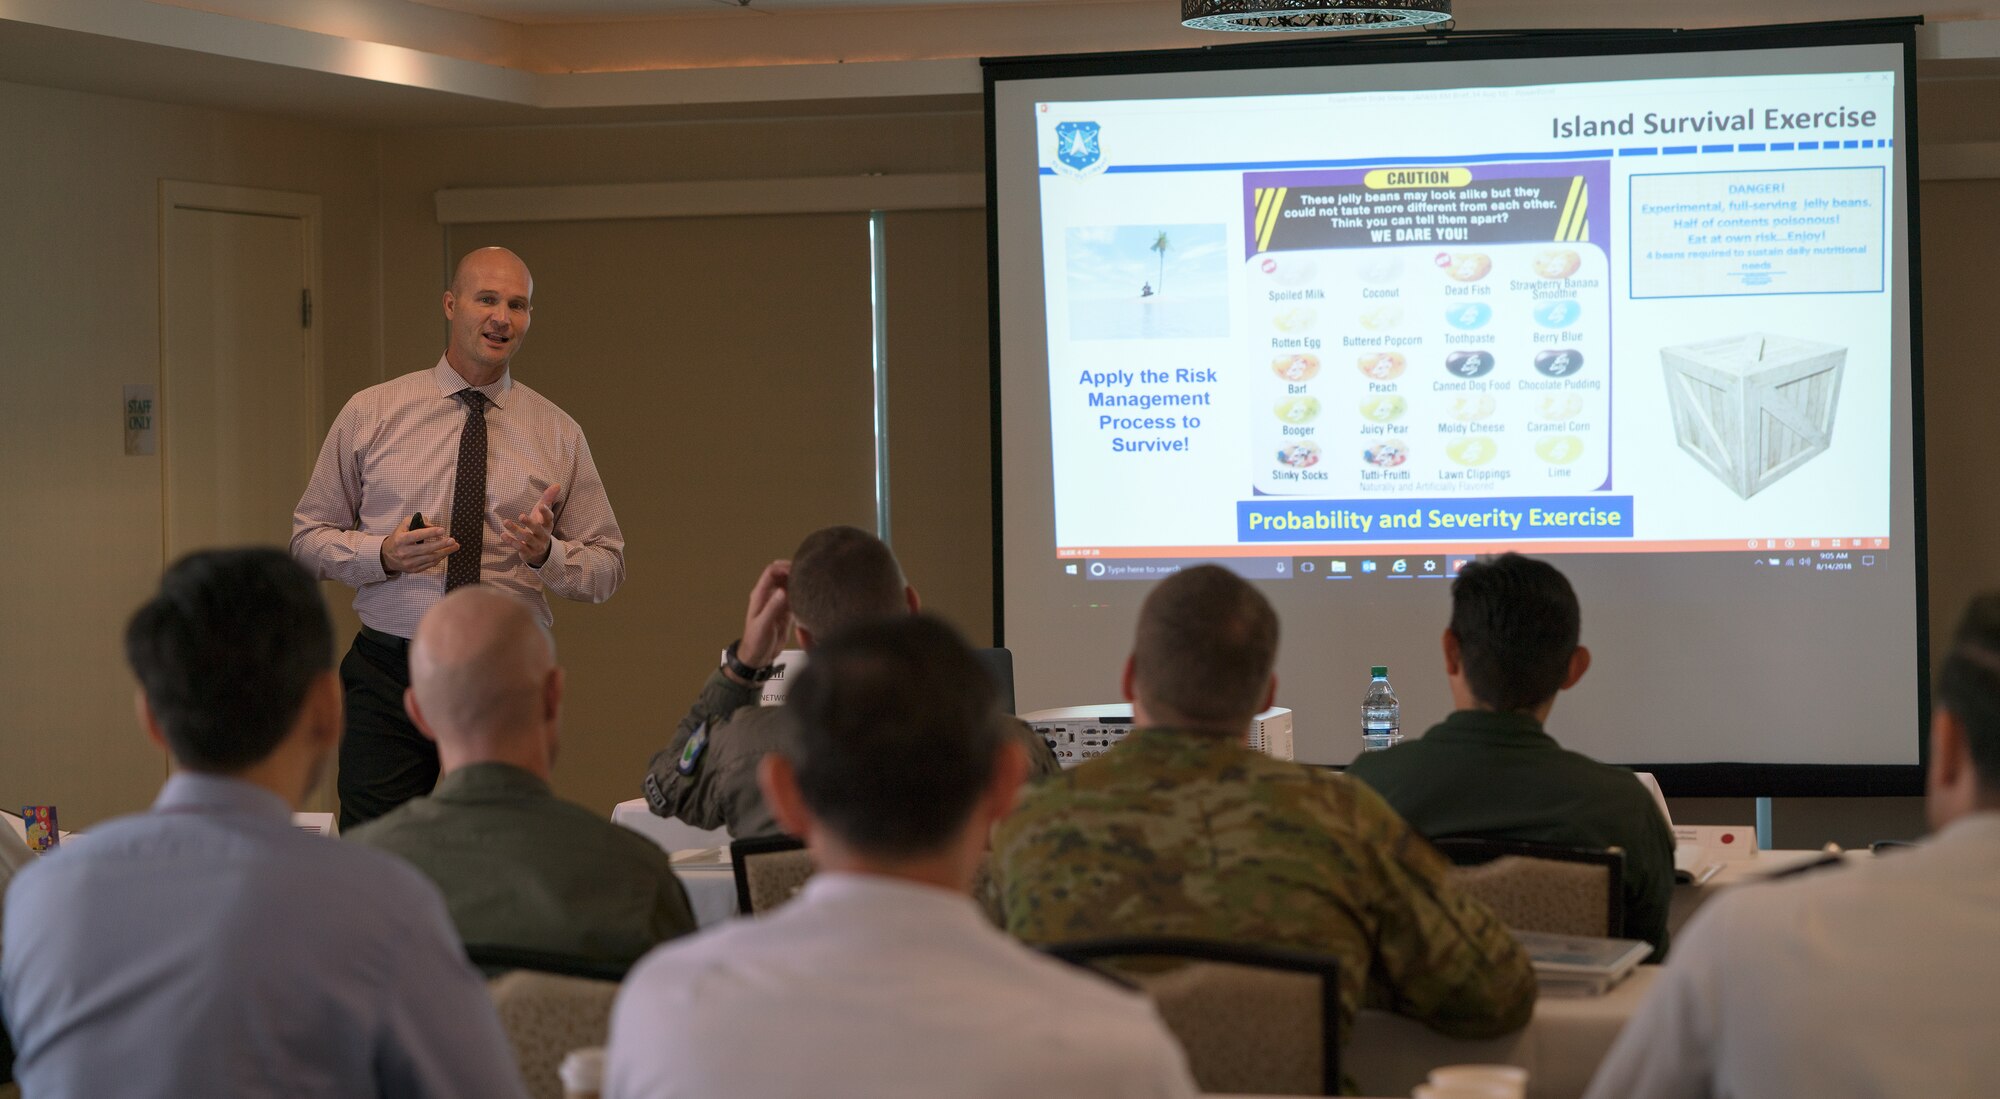 Darron Haughn, Chief of Aviation Safety, Air Force Space Command, gives a presentation about resource and risk management at the Asia-Pacific Aviation Safety Subject Matter Expert Exchange (APASS) in Honolulu, Hawaii, Aug. 14, 2018. APASS allows partner nations in the Indo-Pacific to discuss aviation safety practices and devise solutions to challenges faced by the various air forces. (U.S. Air Force photo by Staff Sgt. Daniel Robles)